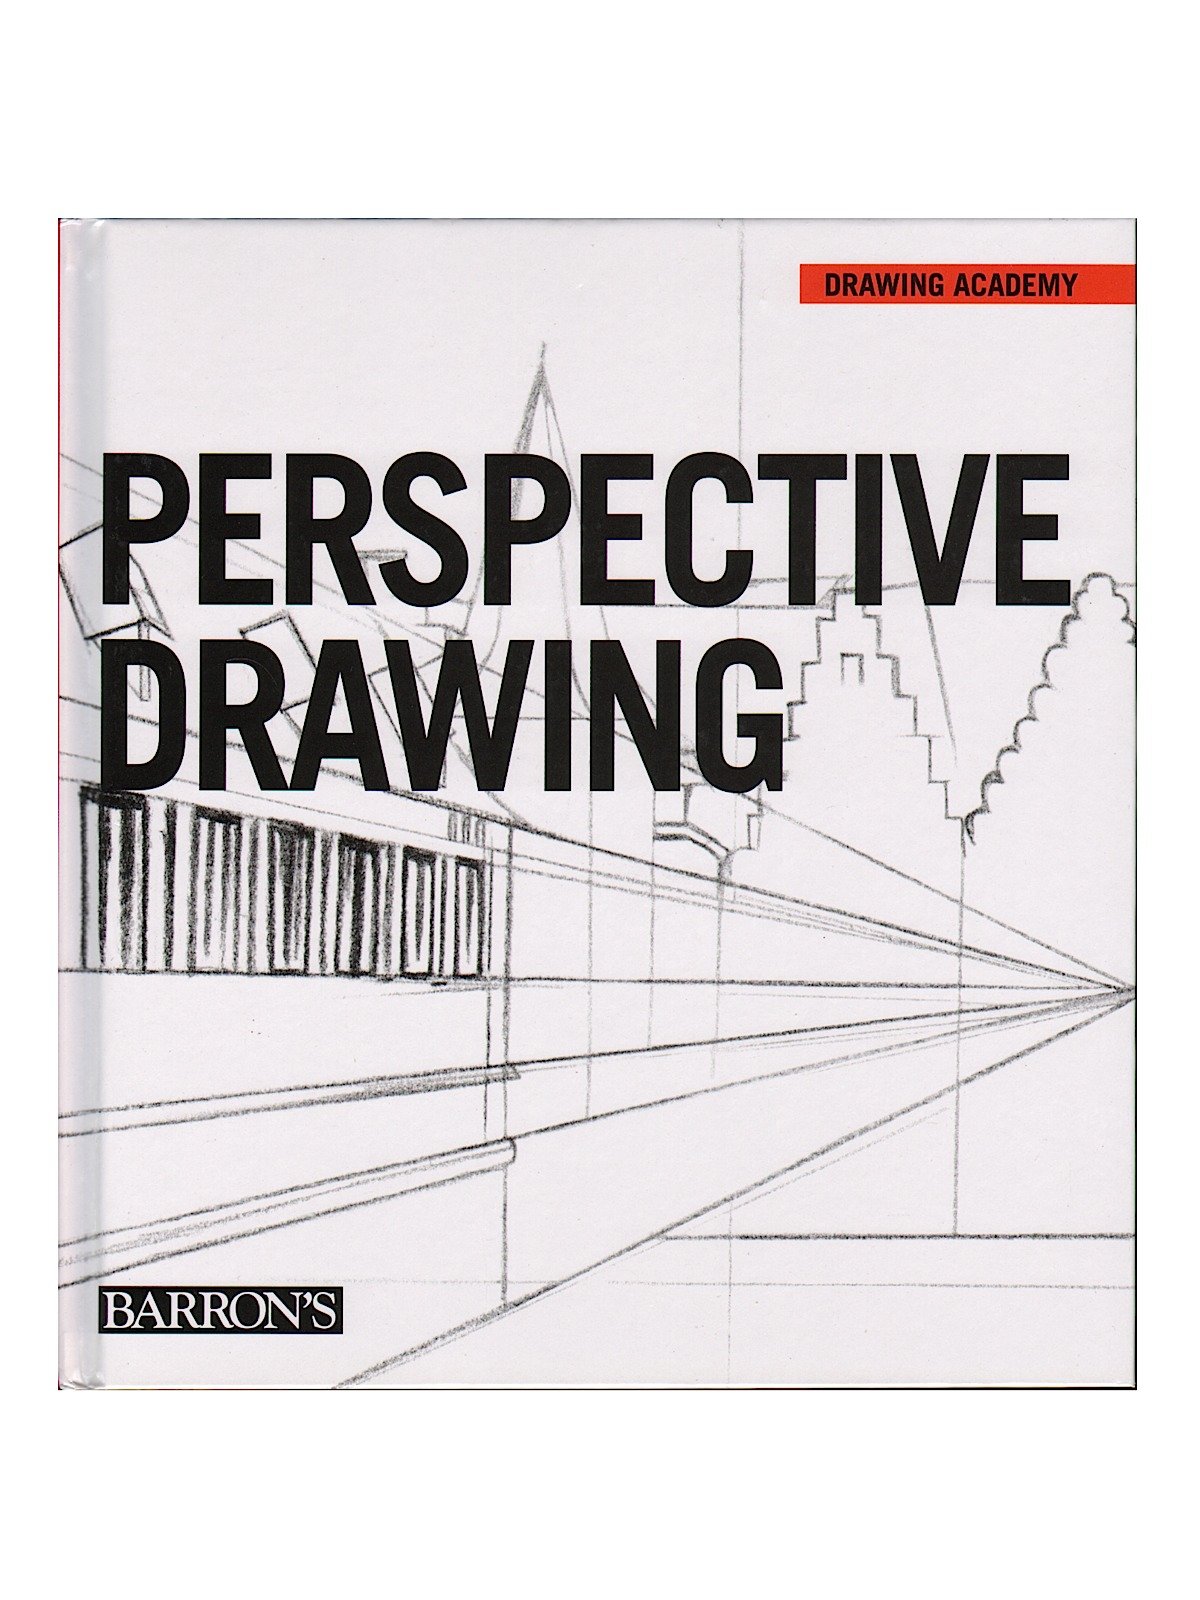 Barron's - Perspective Drawing